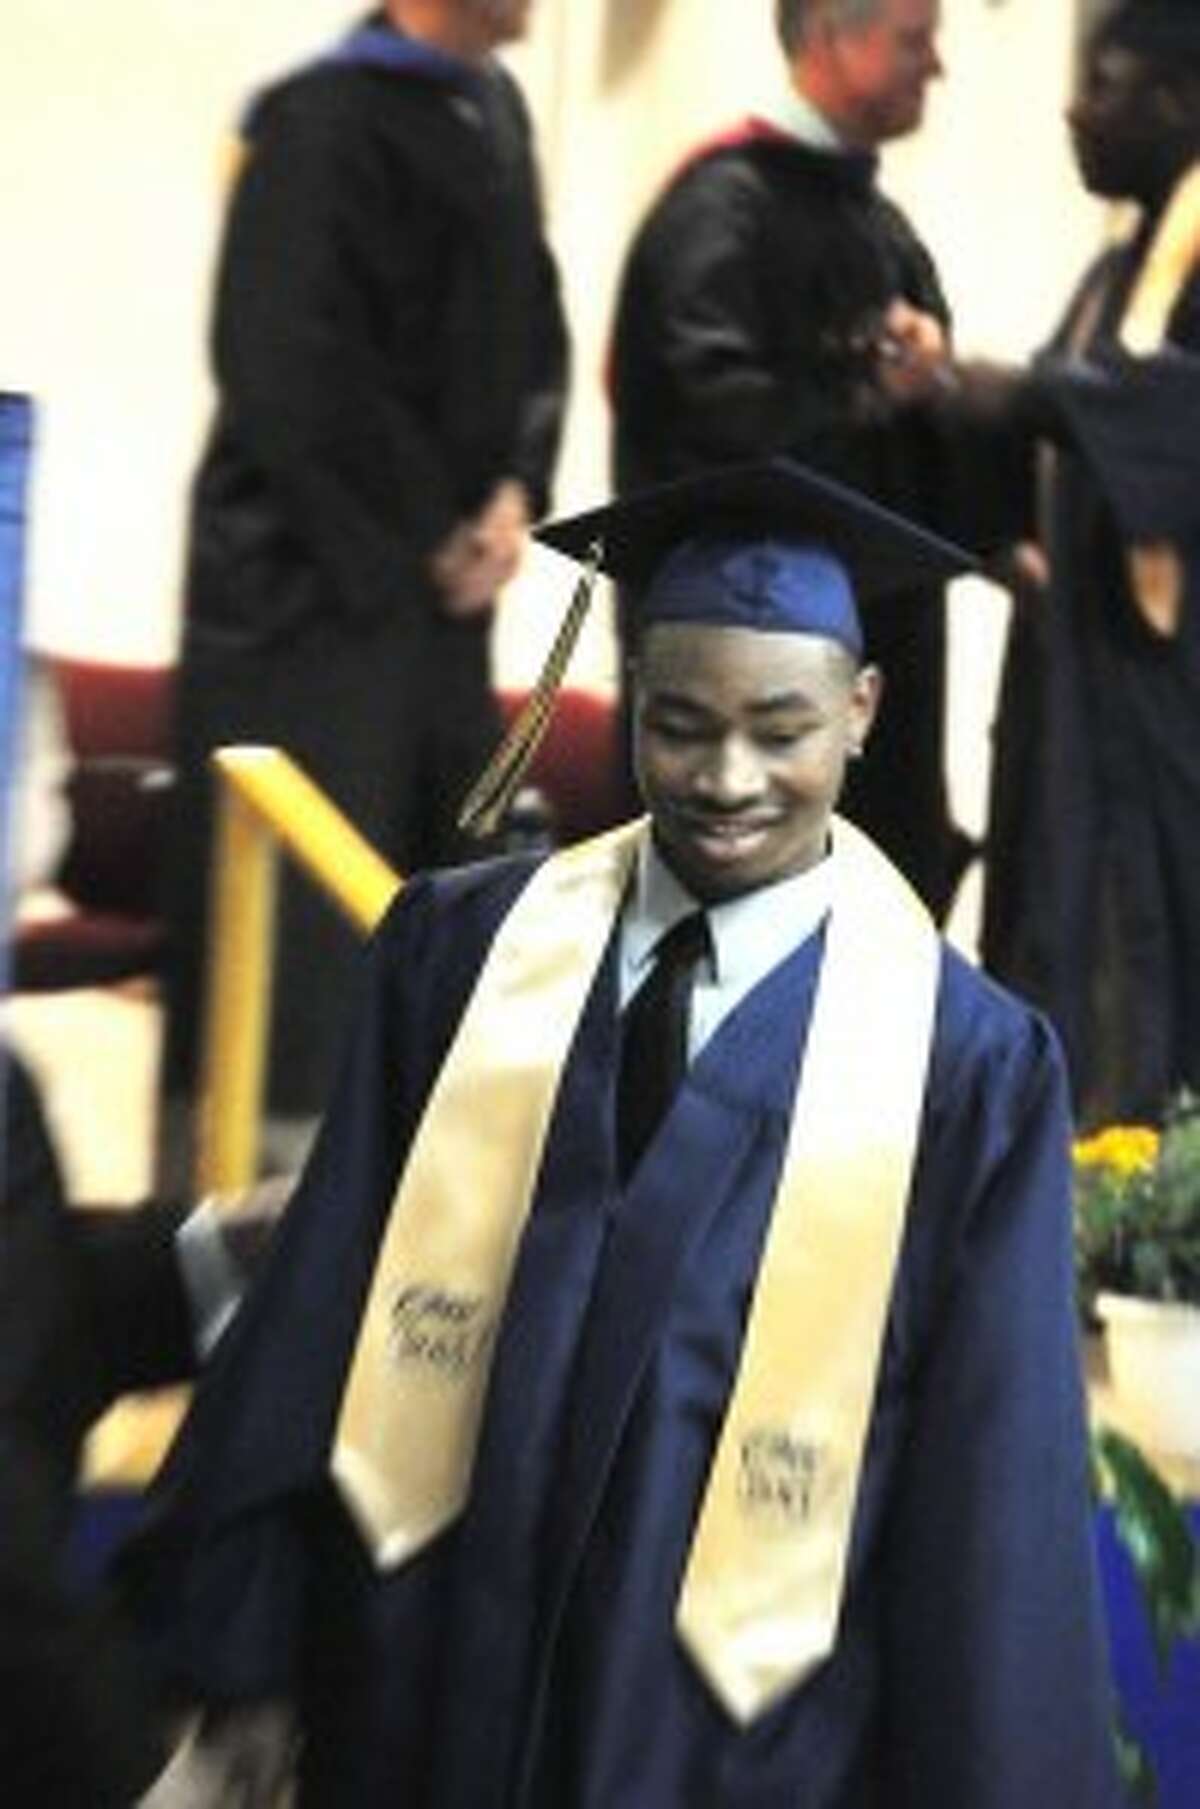 FINALLY MADE IT: (RIGHT) Anthony Horton smiles as we walks off stage after receiving his diploma. Horton was one of 14 Baldwin High School seniors who graduated on Friday.